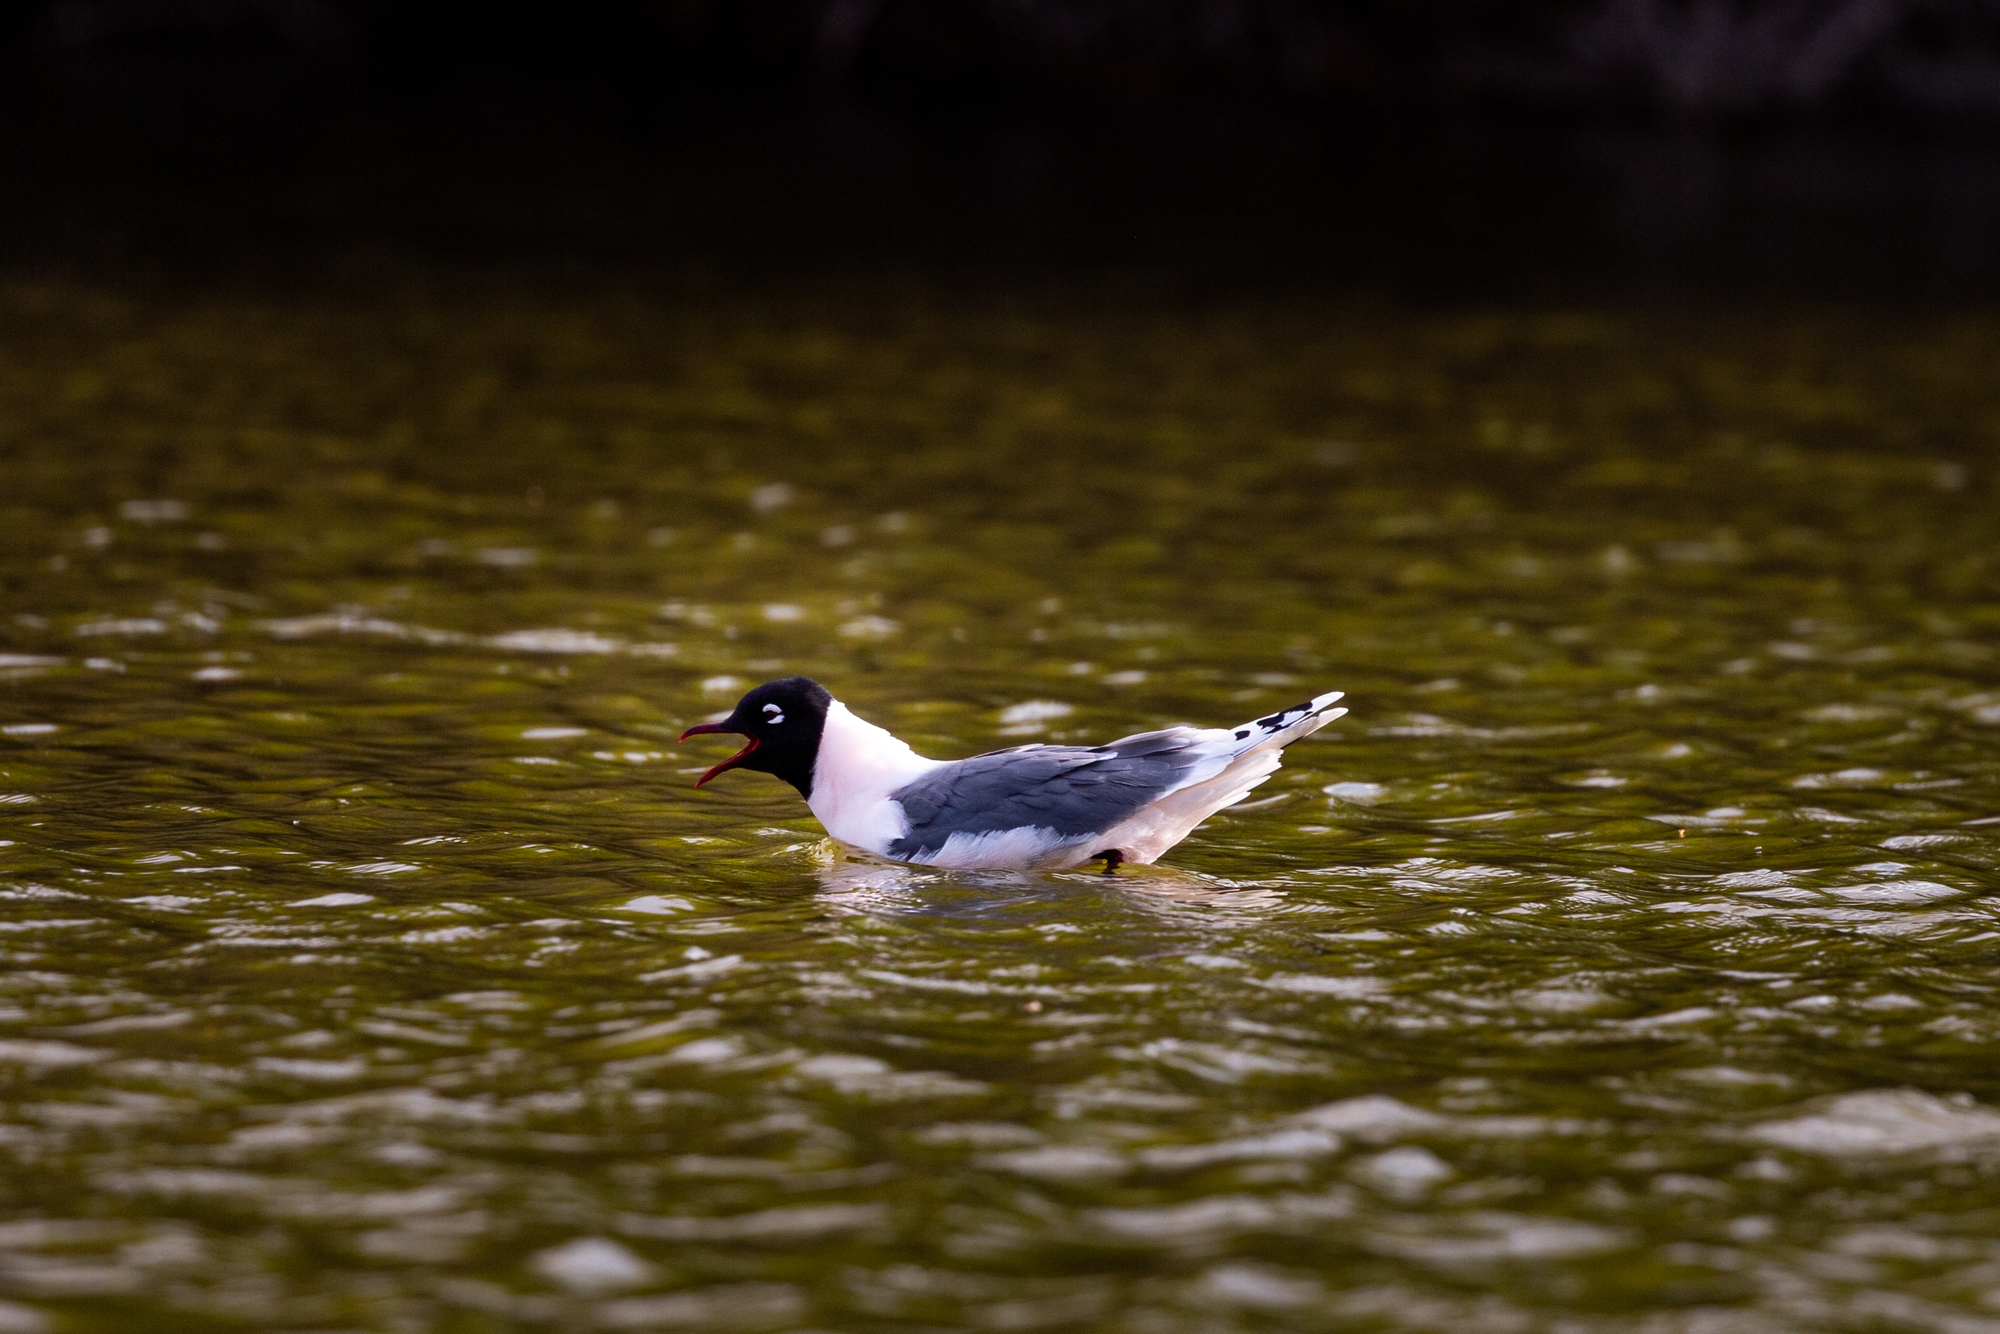 Franklin's Gull swimming in a pond. Their beak is open